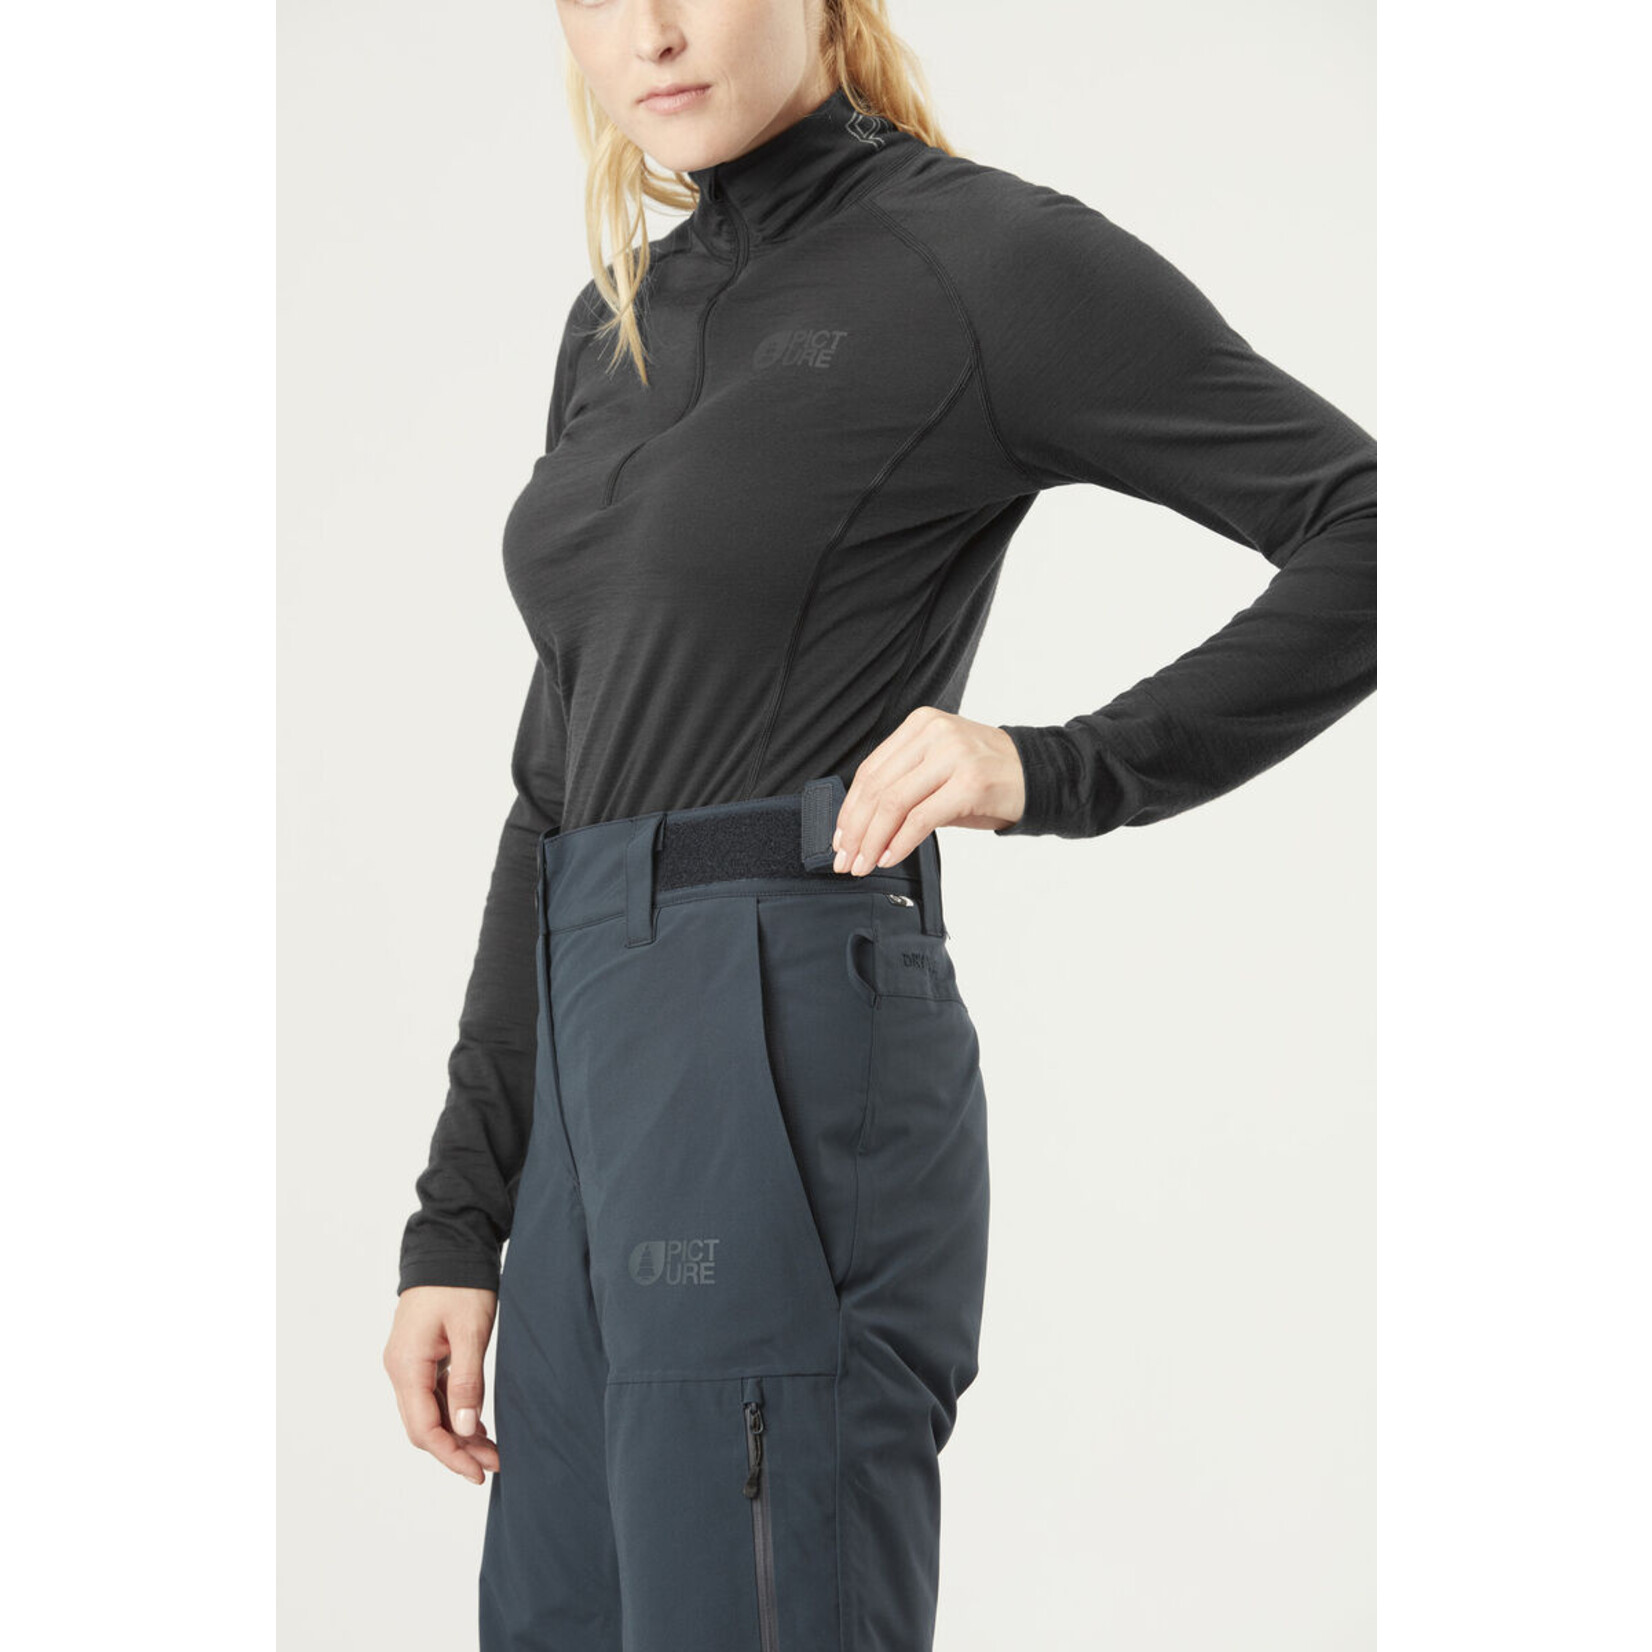 Picture Organic Picture Organic Women's Hermiance Pants